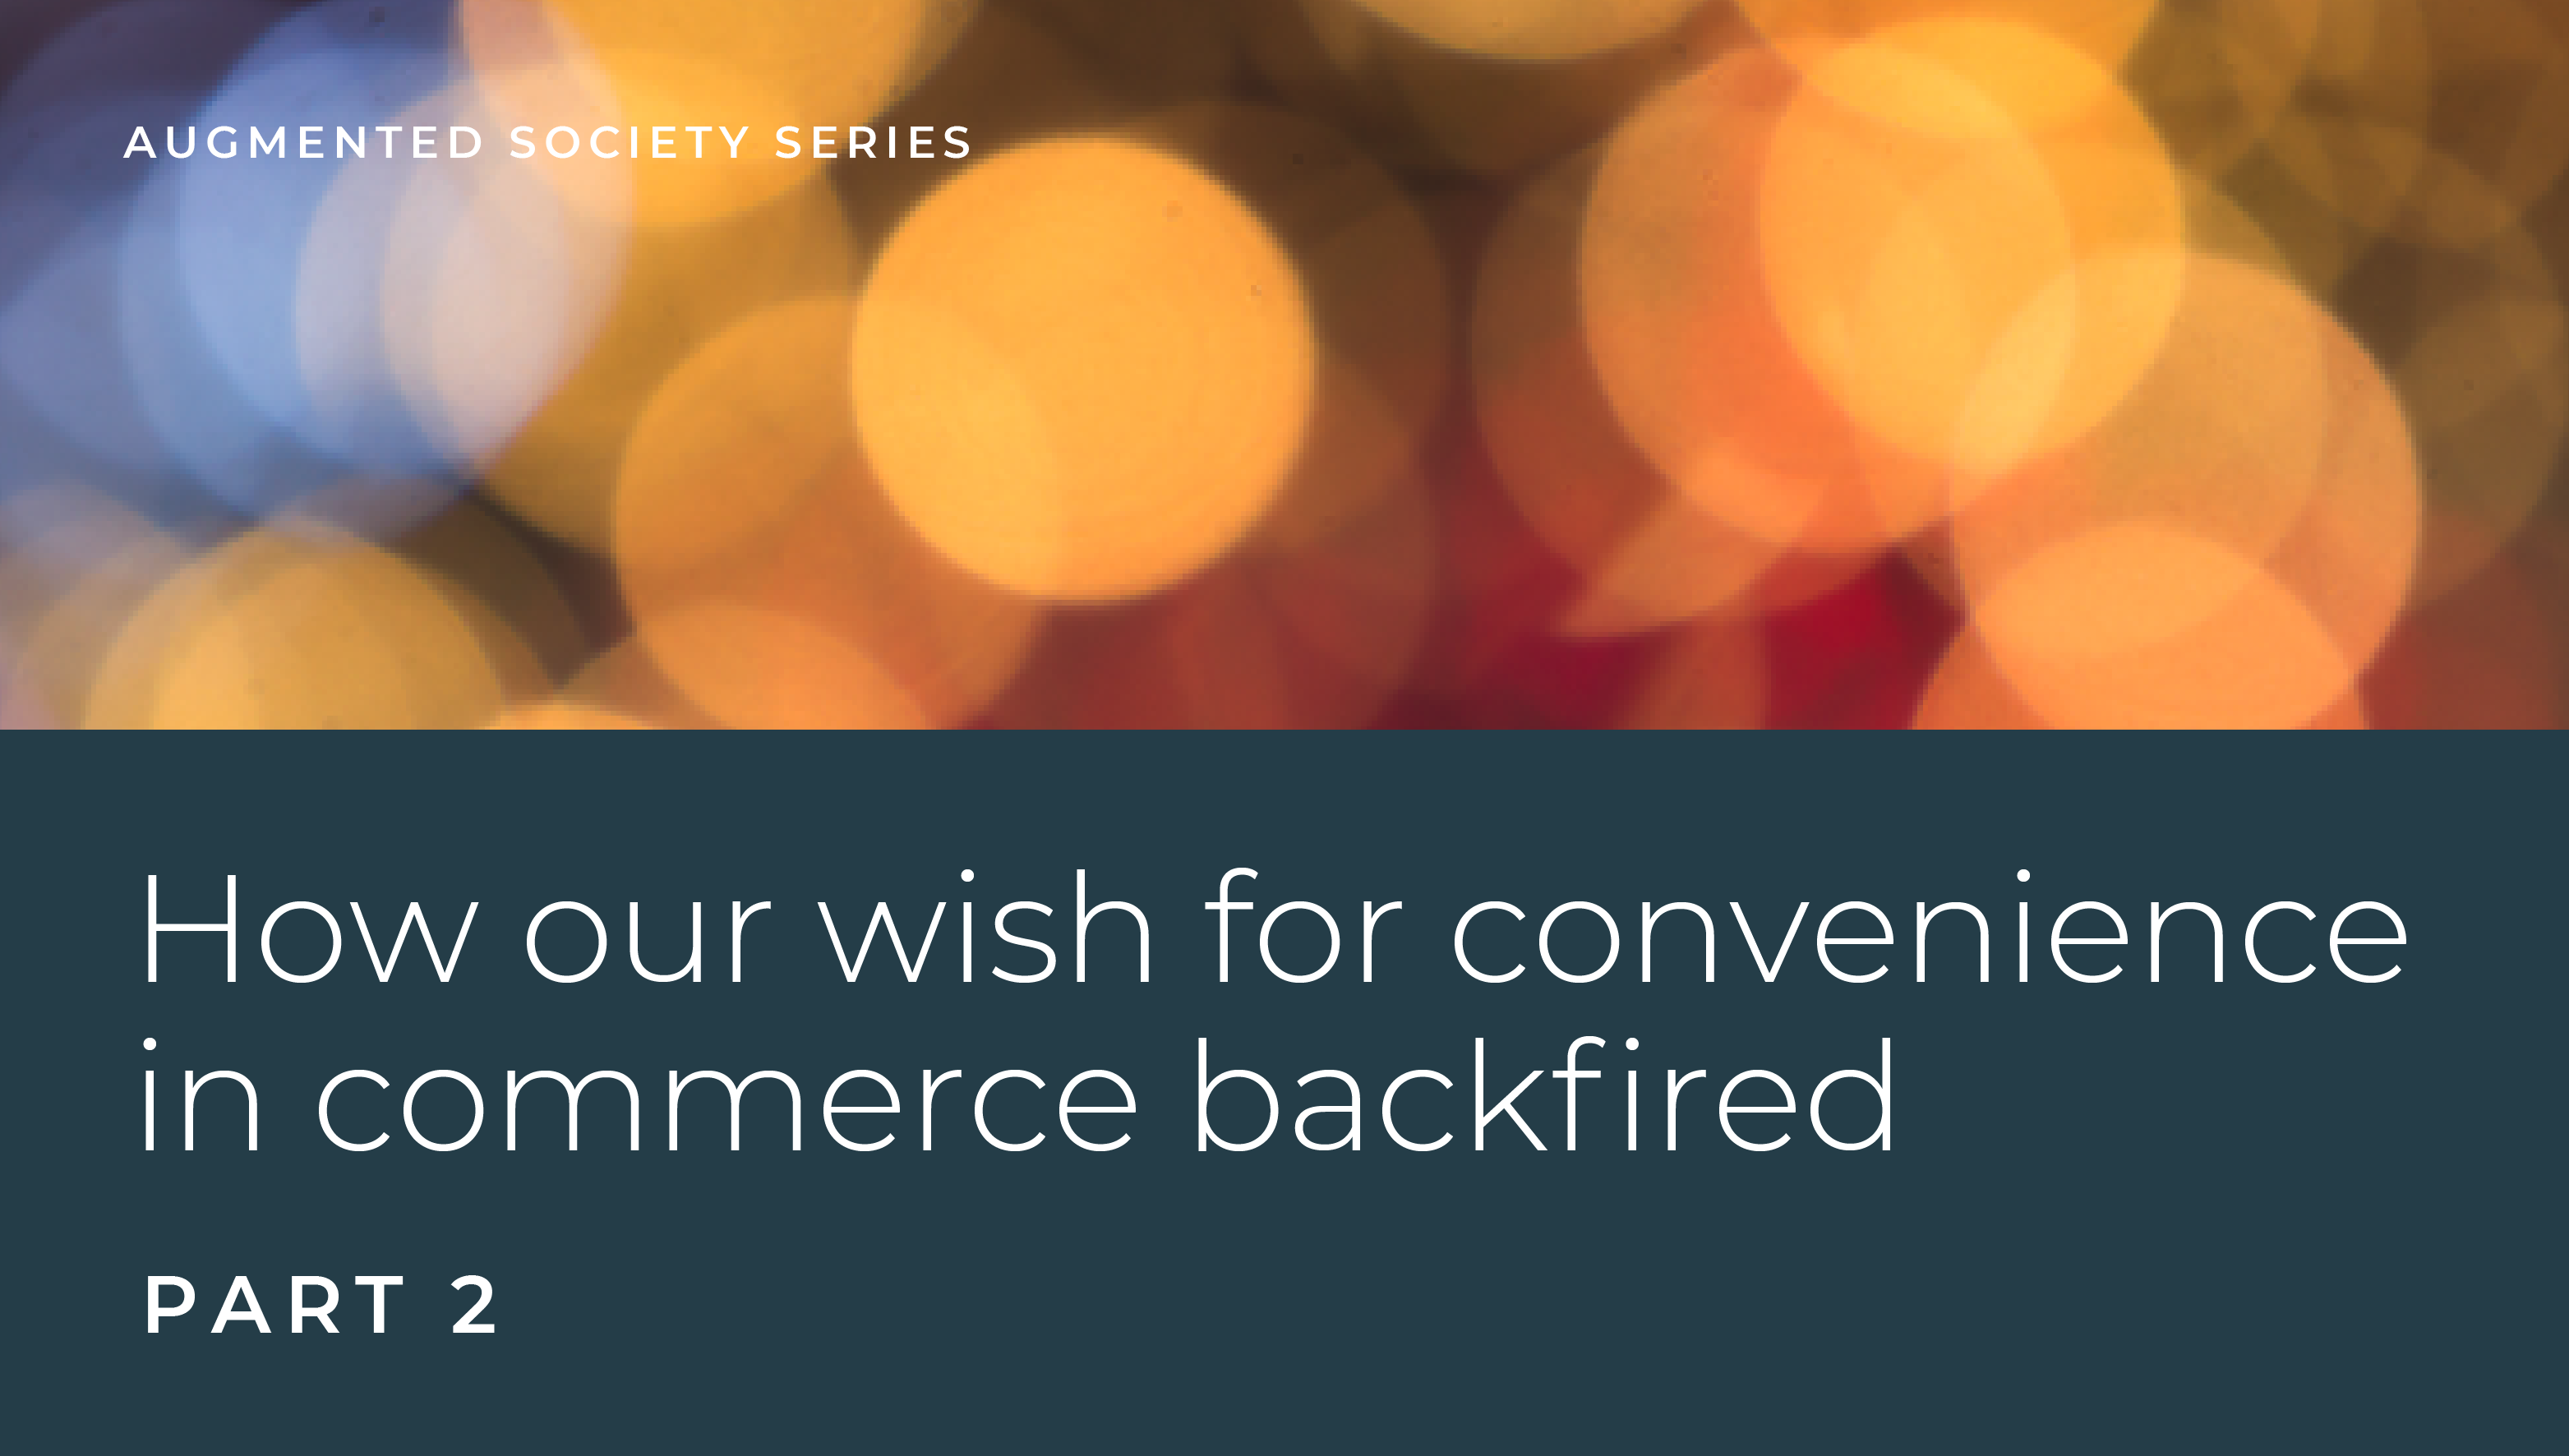 How our wish for convenience in commerce backfired